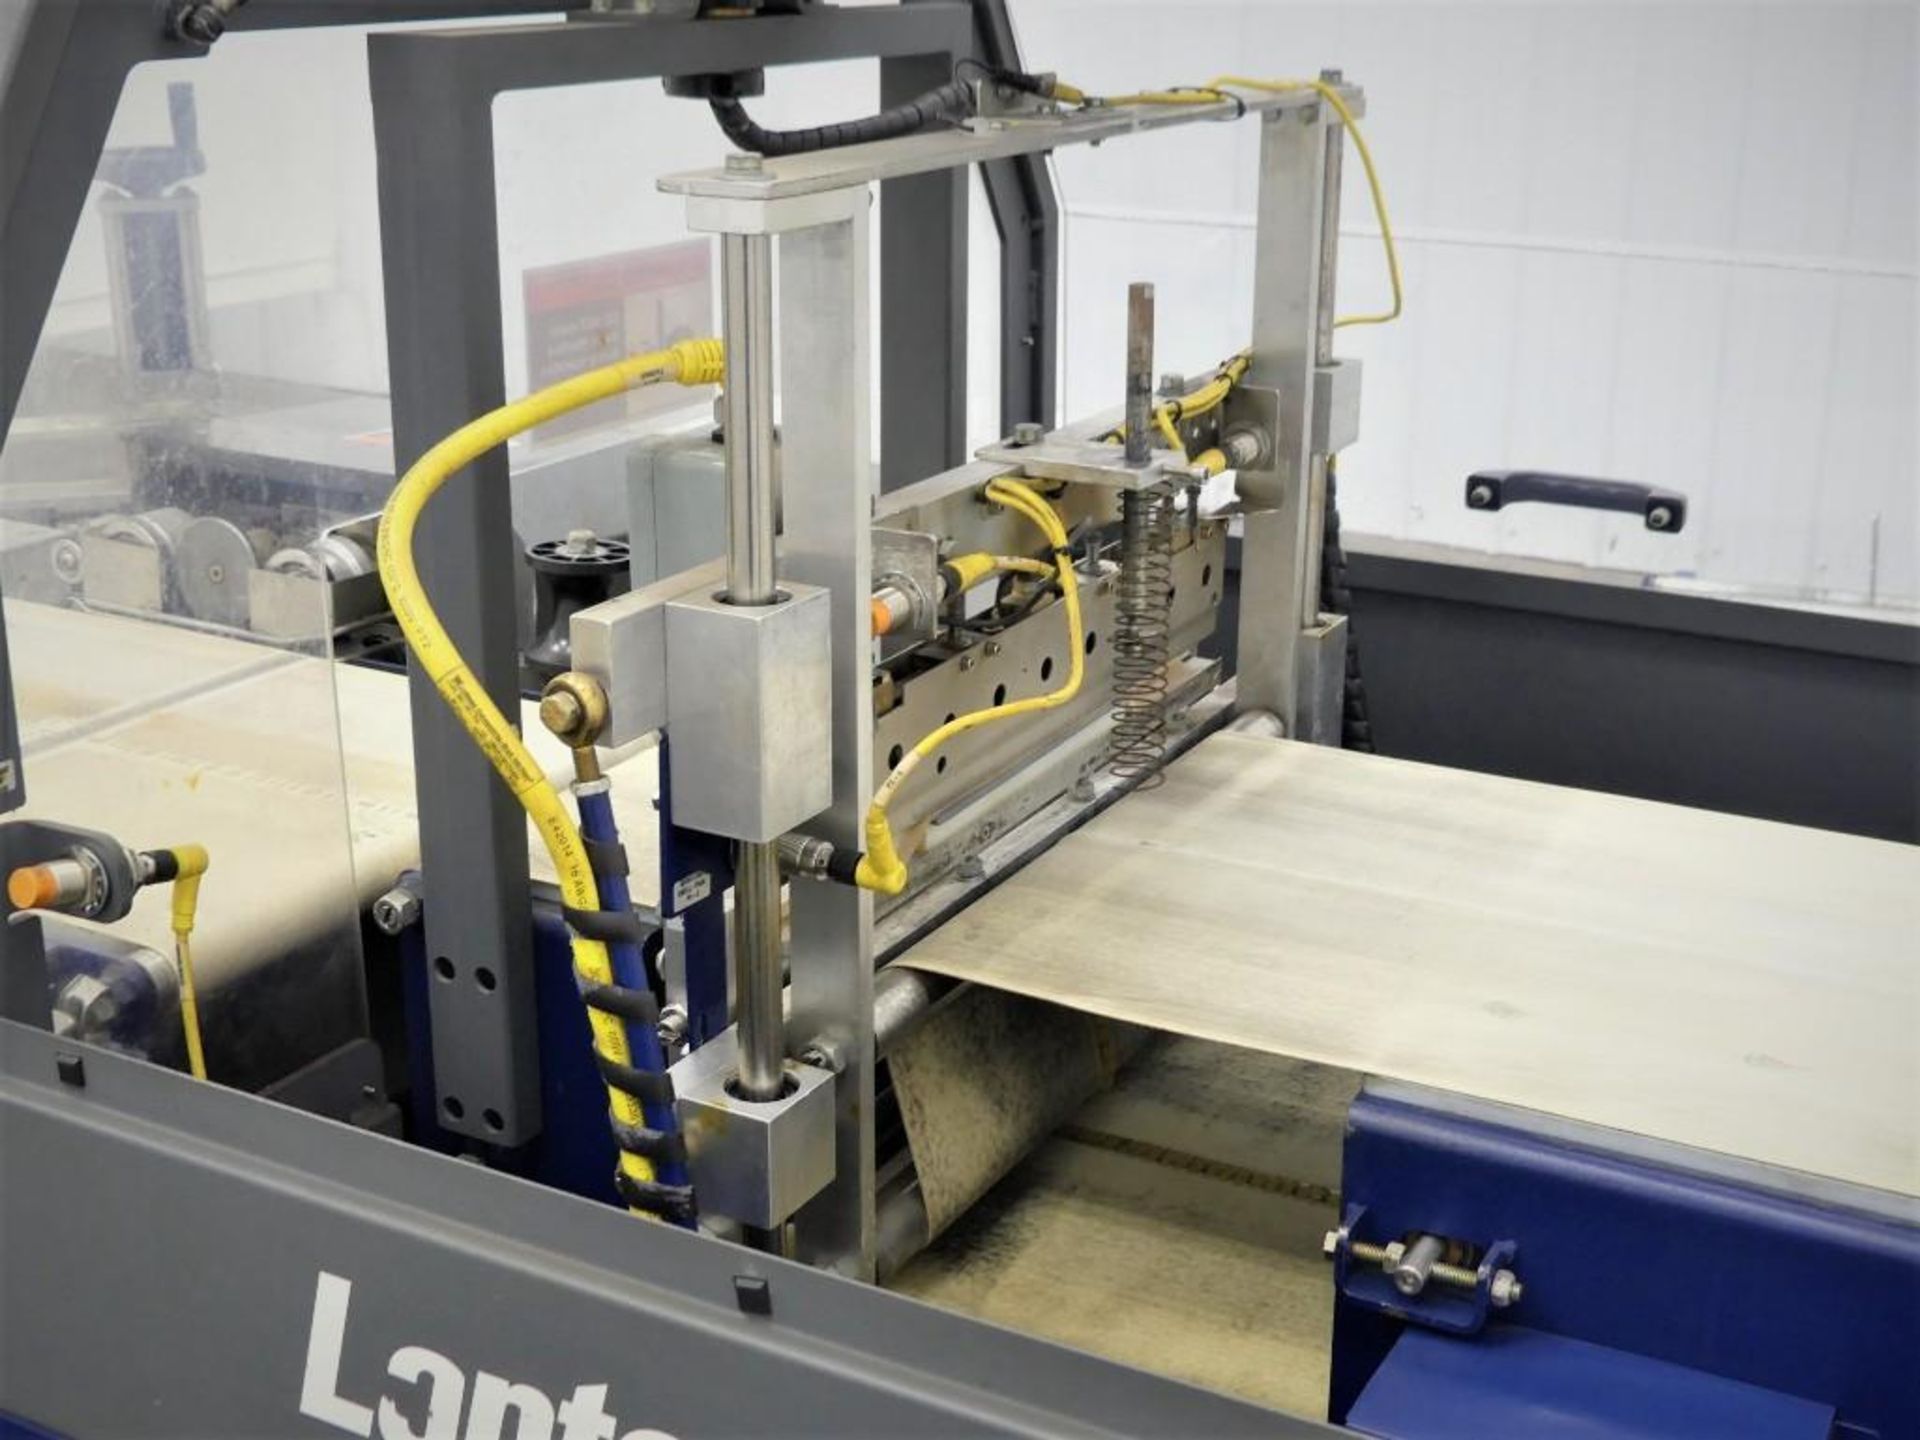 Lantech 200 Side Sealer Includes all parts, electronic components, manuals, etc - Image 13 of 17